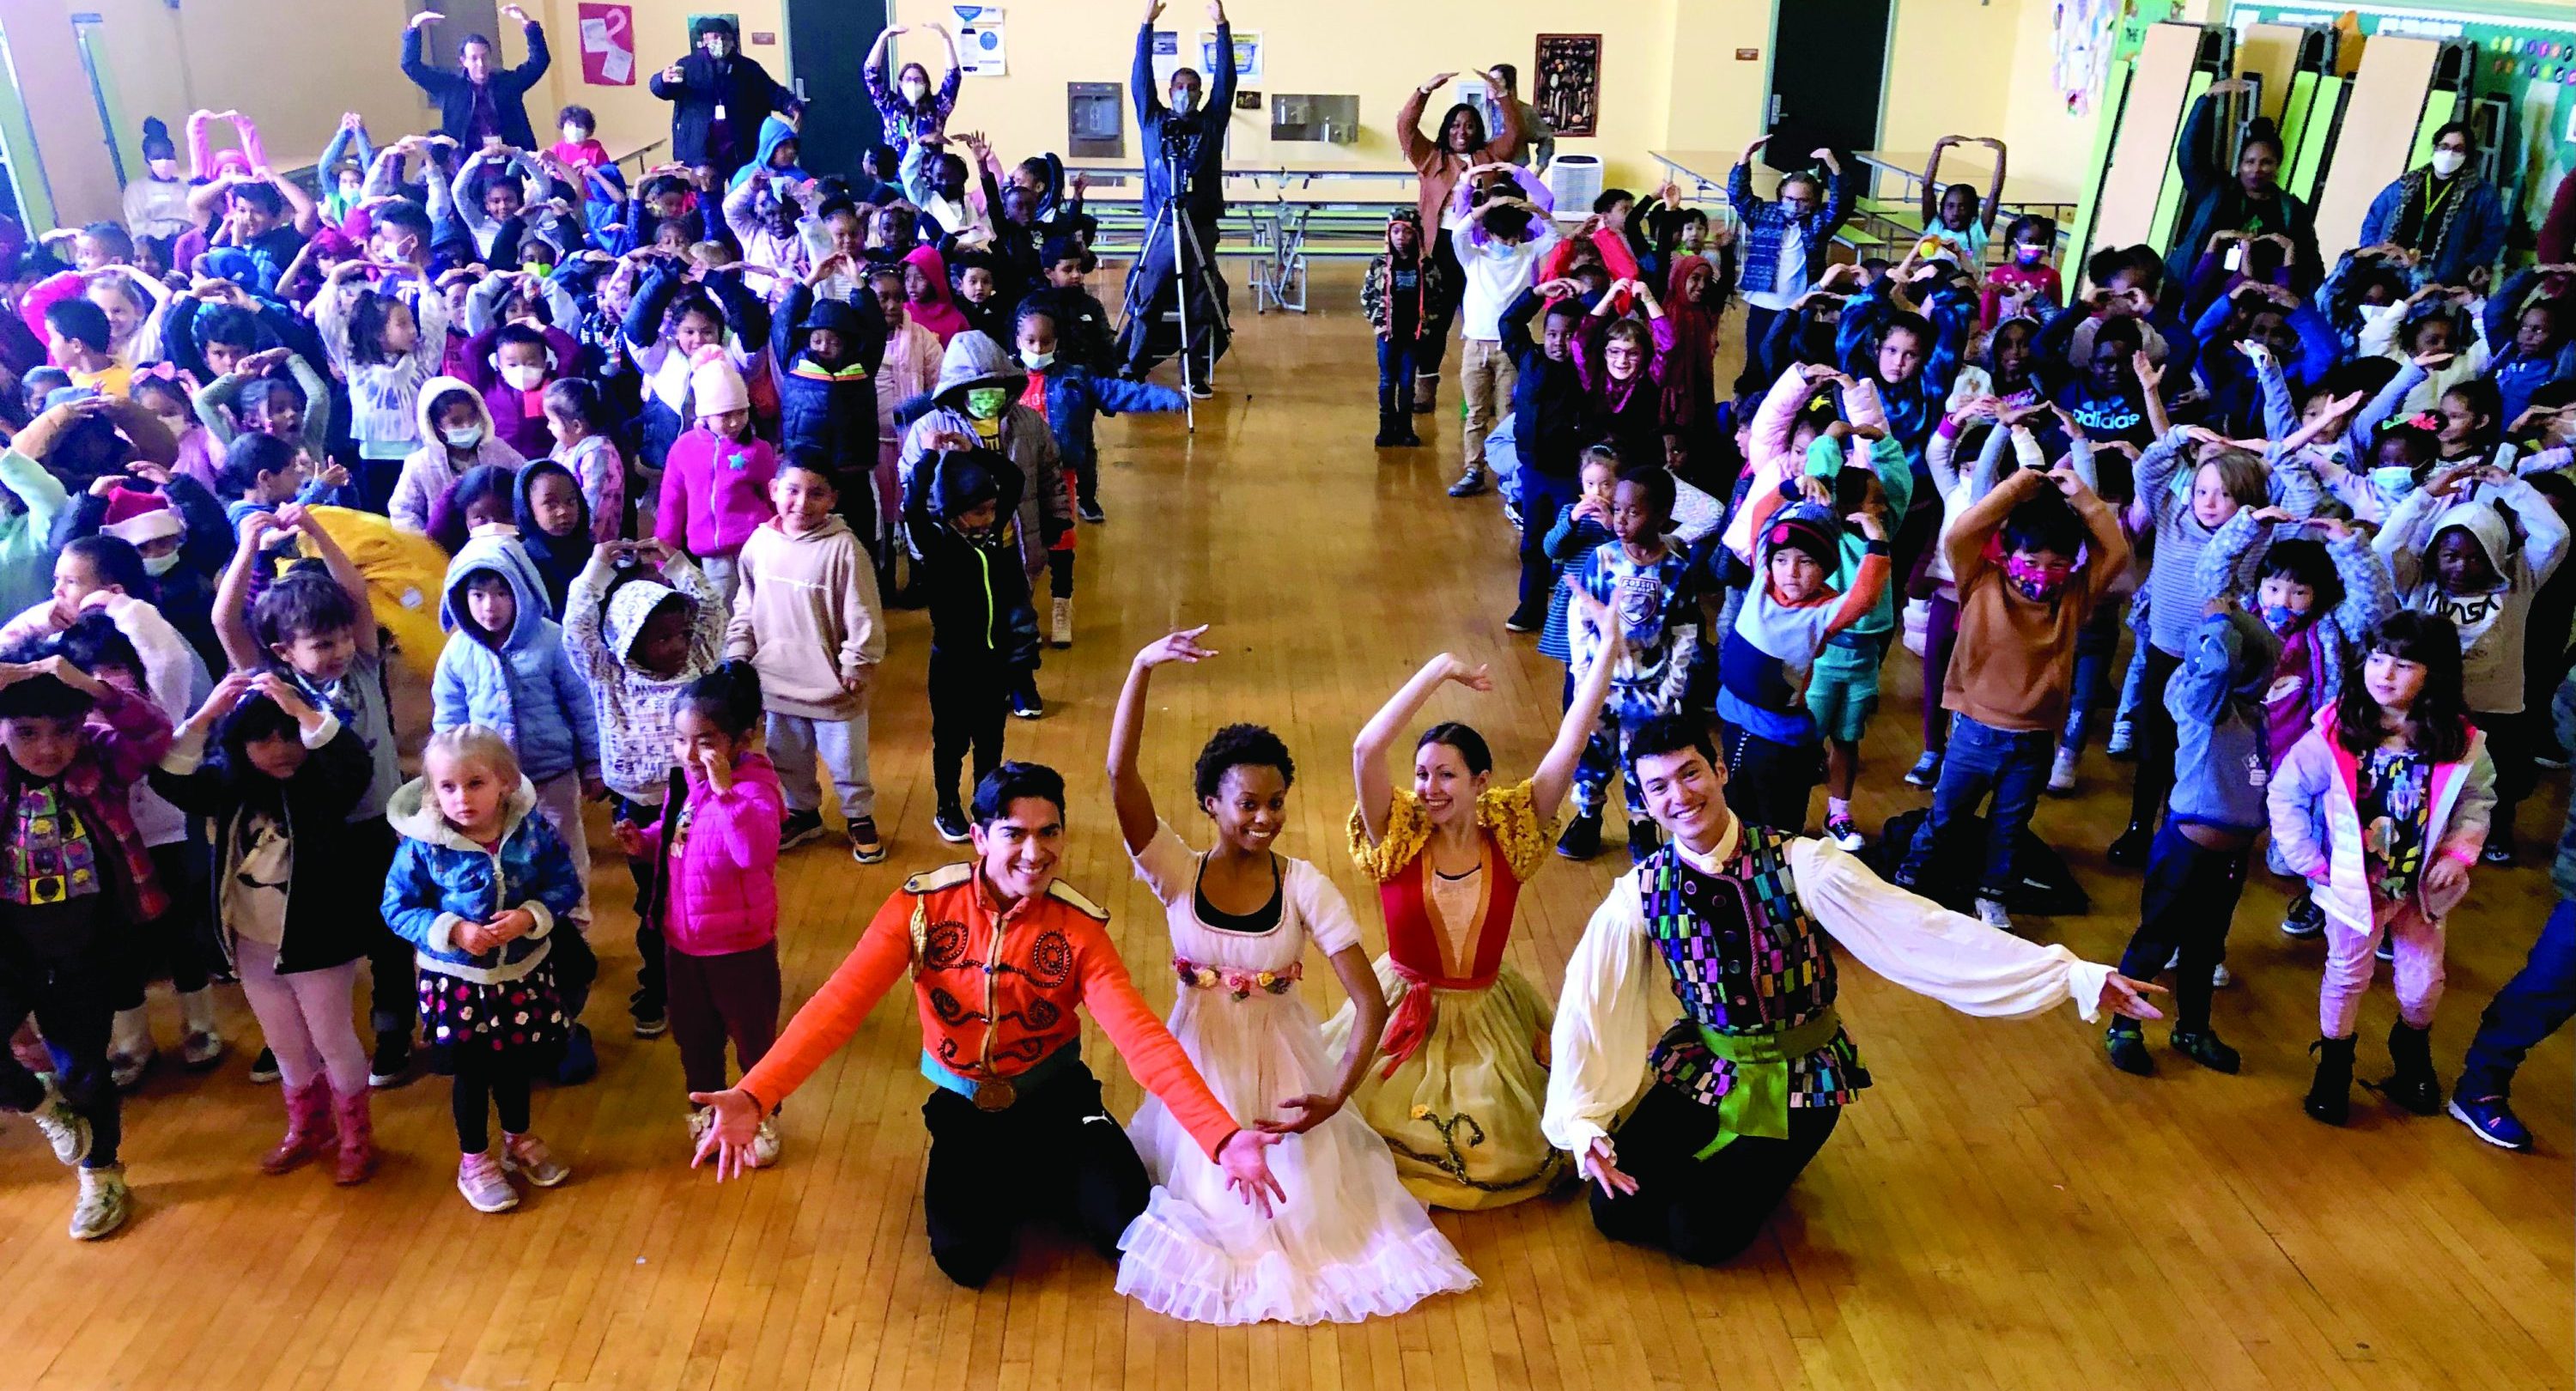 Four performers from OBC's "The Nutcracker" pose in the middle of the aisle while elementary students hold their arms above their head with fingers touching.